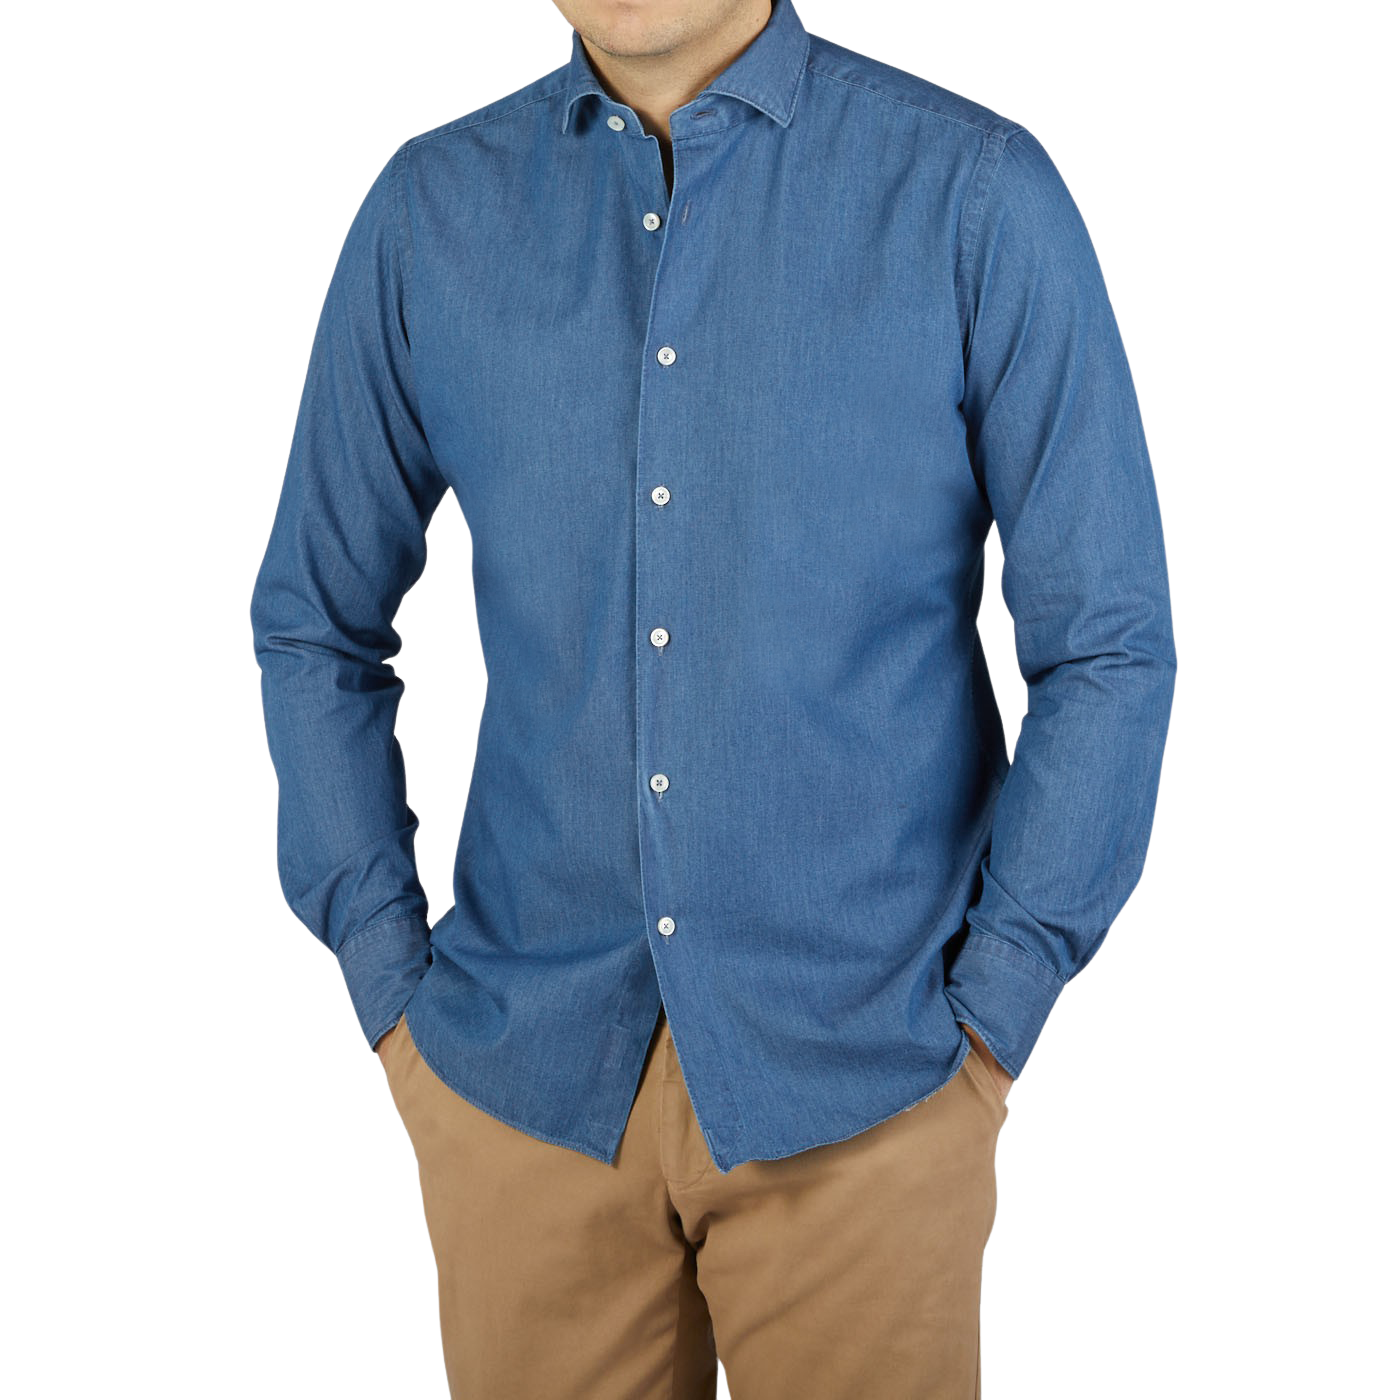 A man wearing a Xacus slim fit washed blue cotton denim casual shirt paired with tan pants.